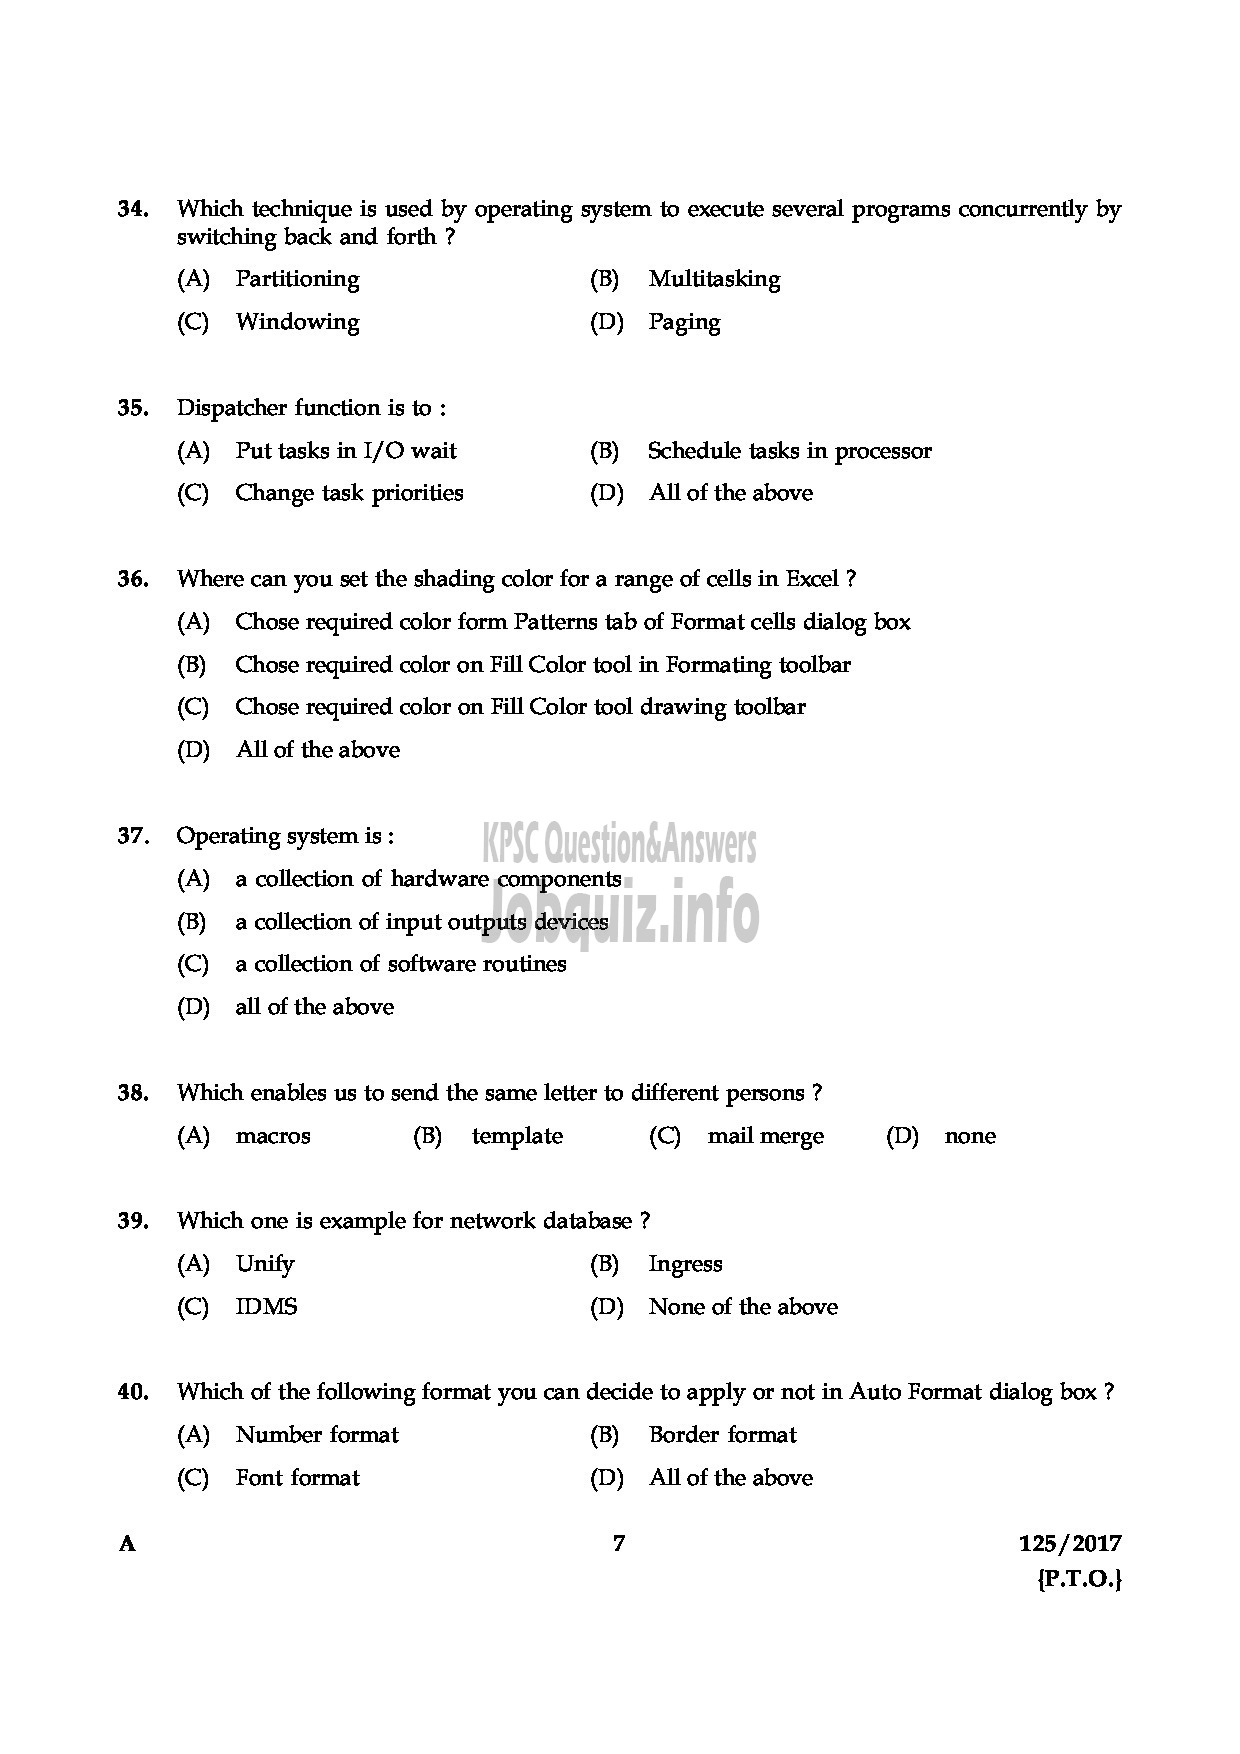 Kerala PSC Question Paper - LECTURER IN COMPUTER APPLICATION COLLEGIATE EDUCATION-7